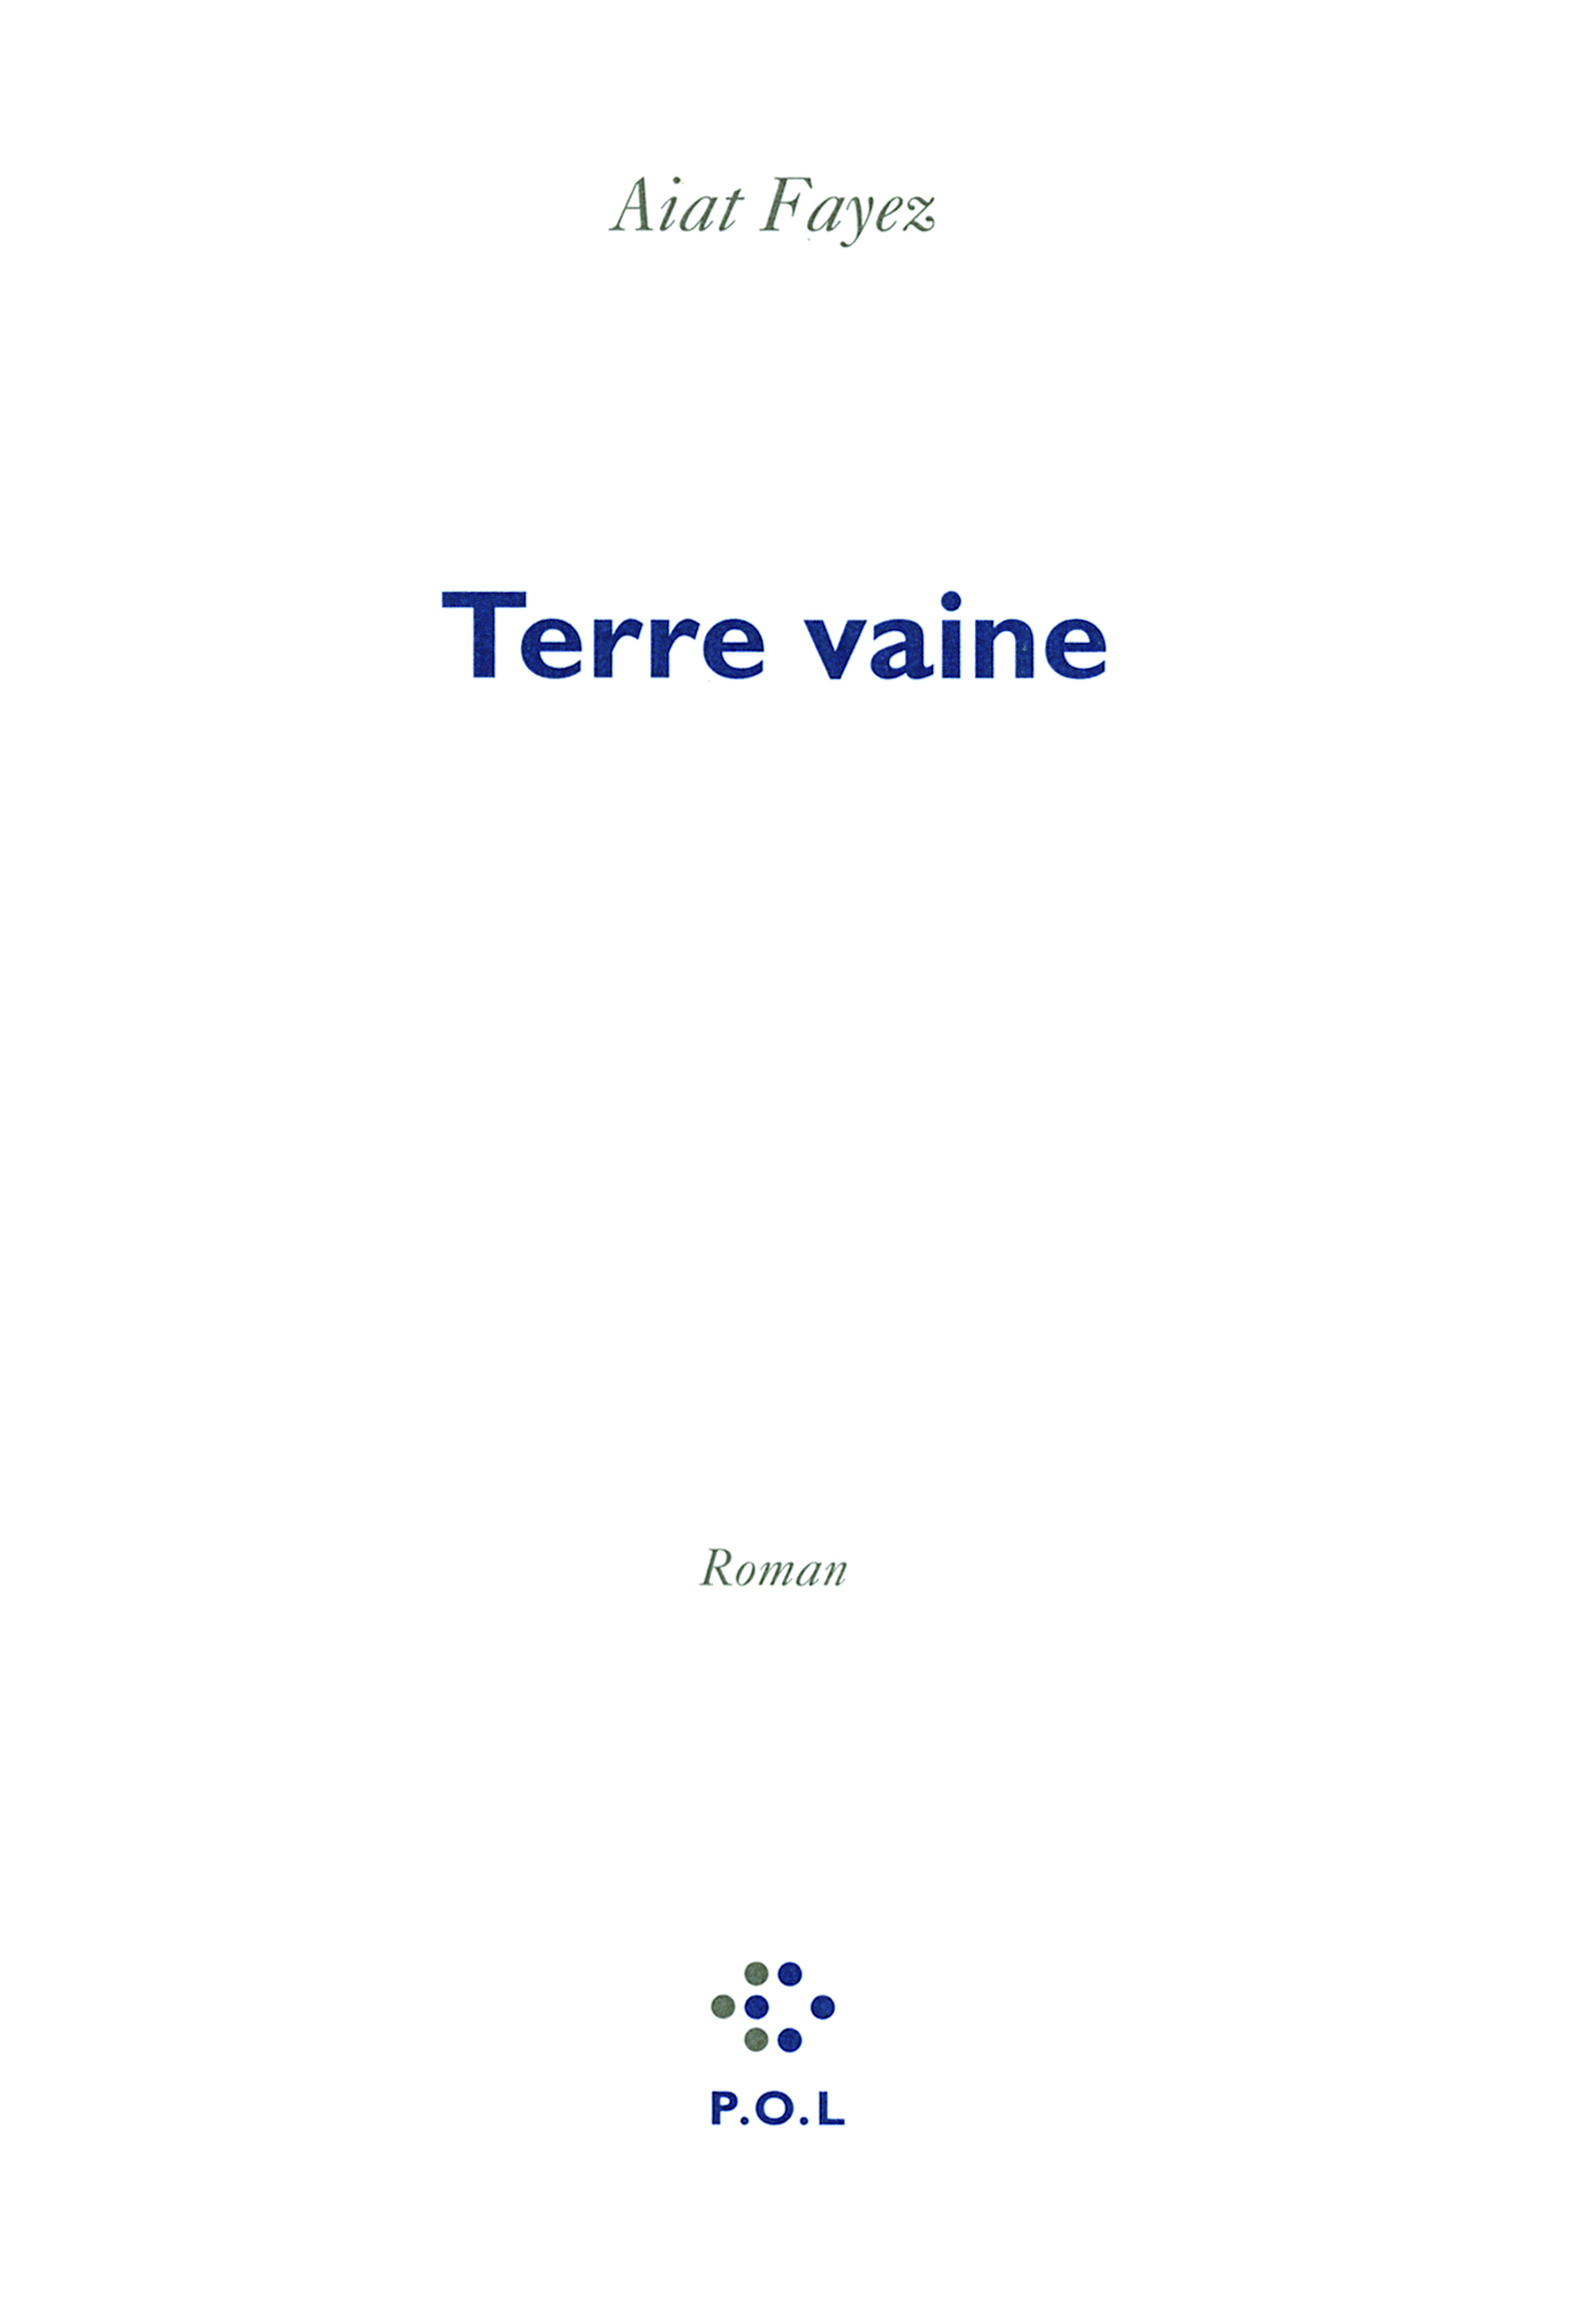 Terre vaine (9782818014943-front-cover)